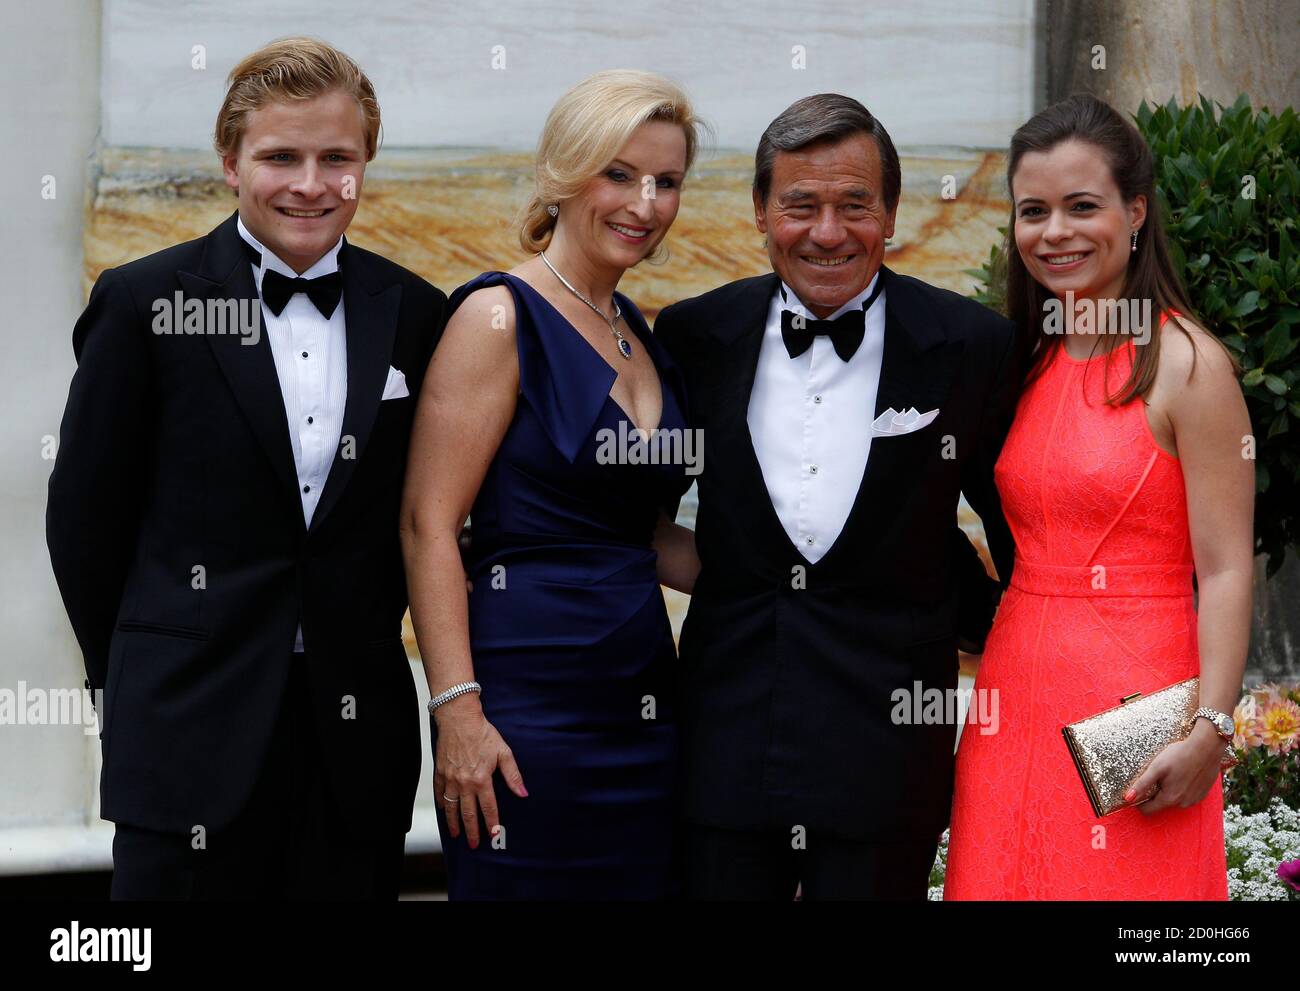 Trigema owner Wolfgang Grupp (2R) is flanked by his son Wolfgang (L-R),  wife Elisabeth and daughter Bonita as they arrive on the red carpet for the  opening of the Bayreuth Wagner opera